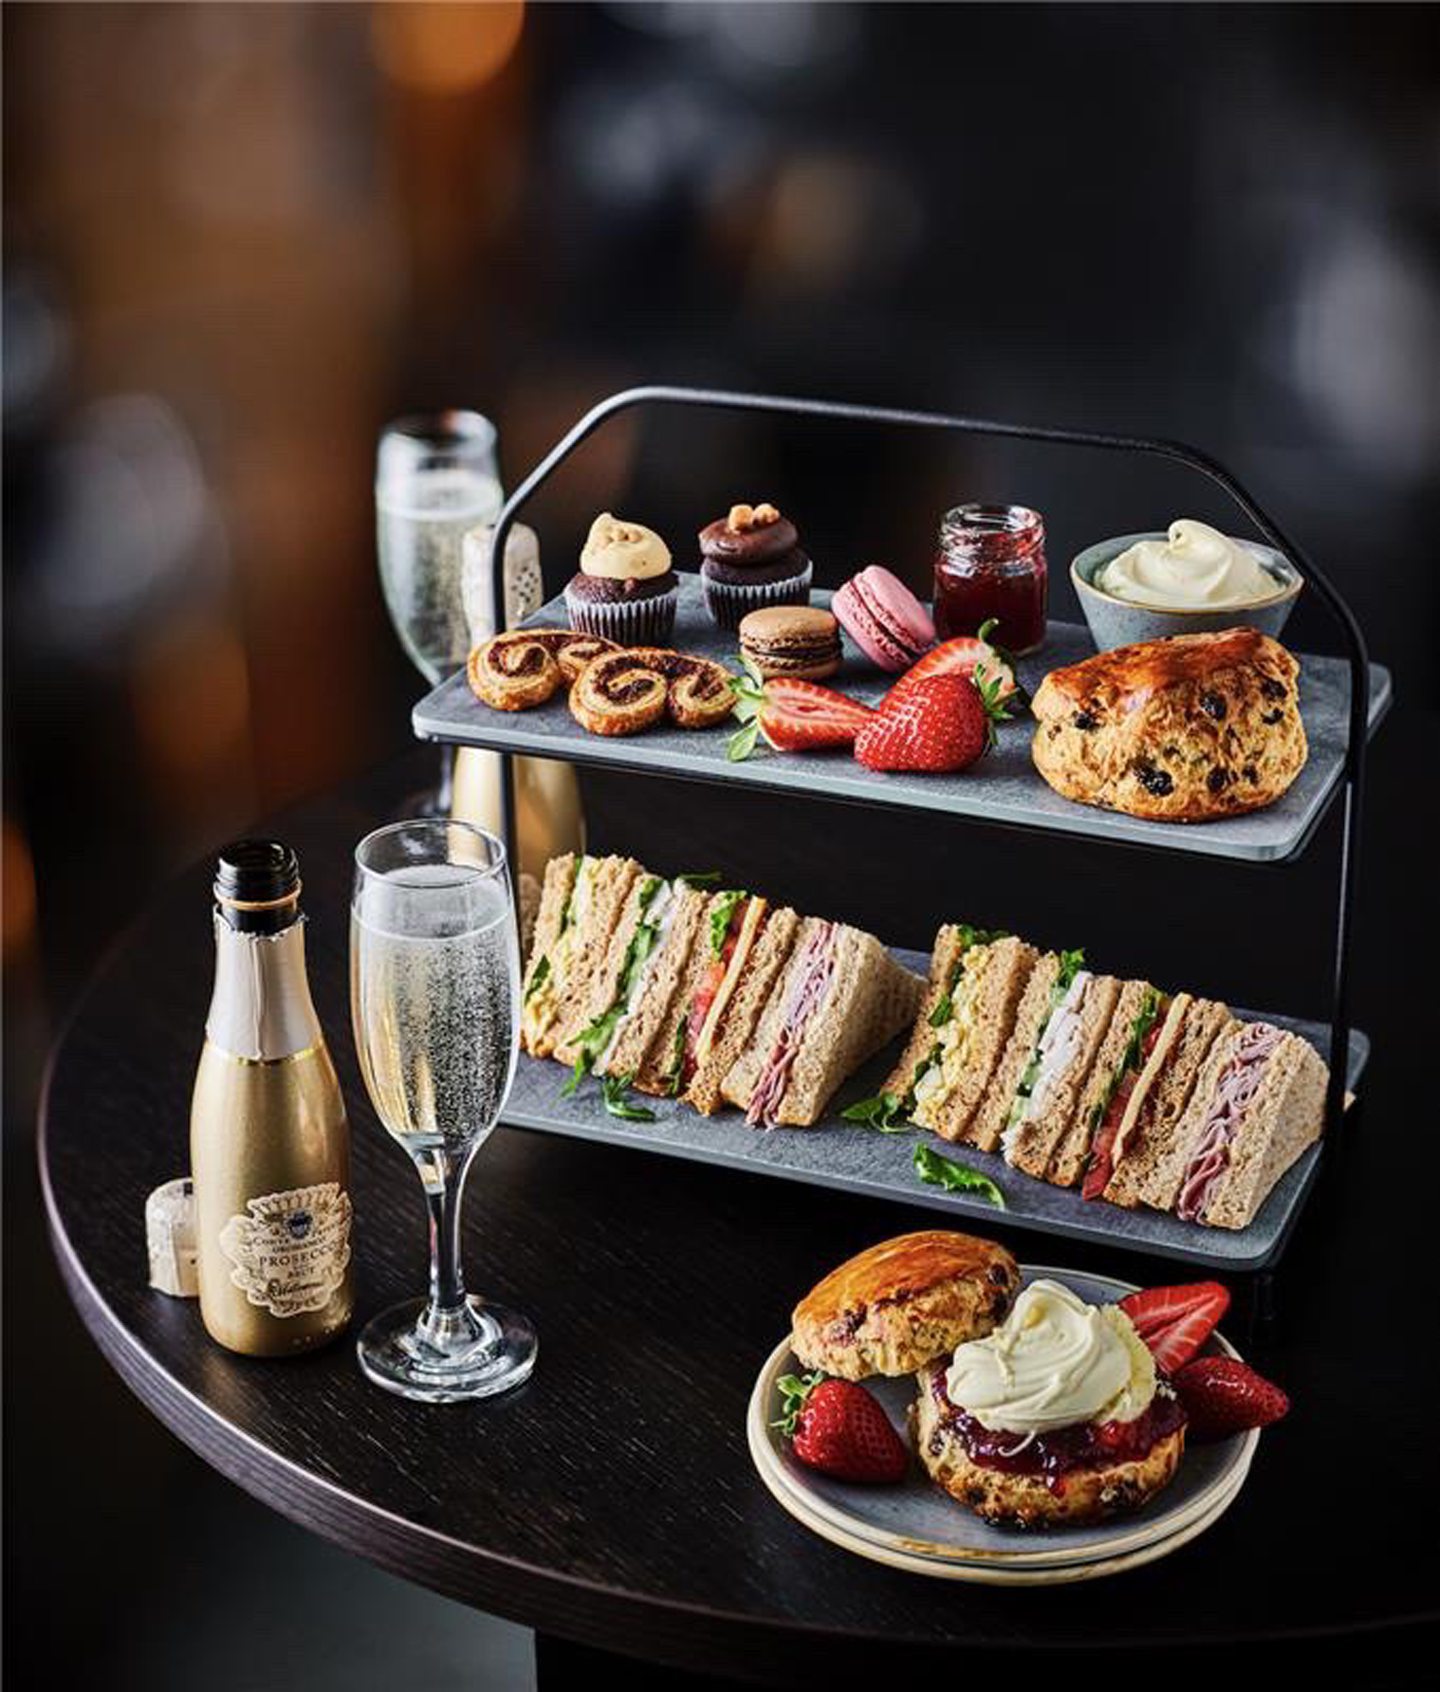 The sort of sumptuous afternoon tea customers could soon be enjoying with their Prosecco at the M&S cafe in Aberdeen.